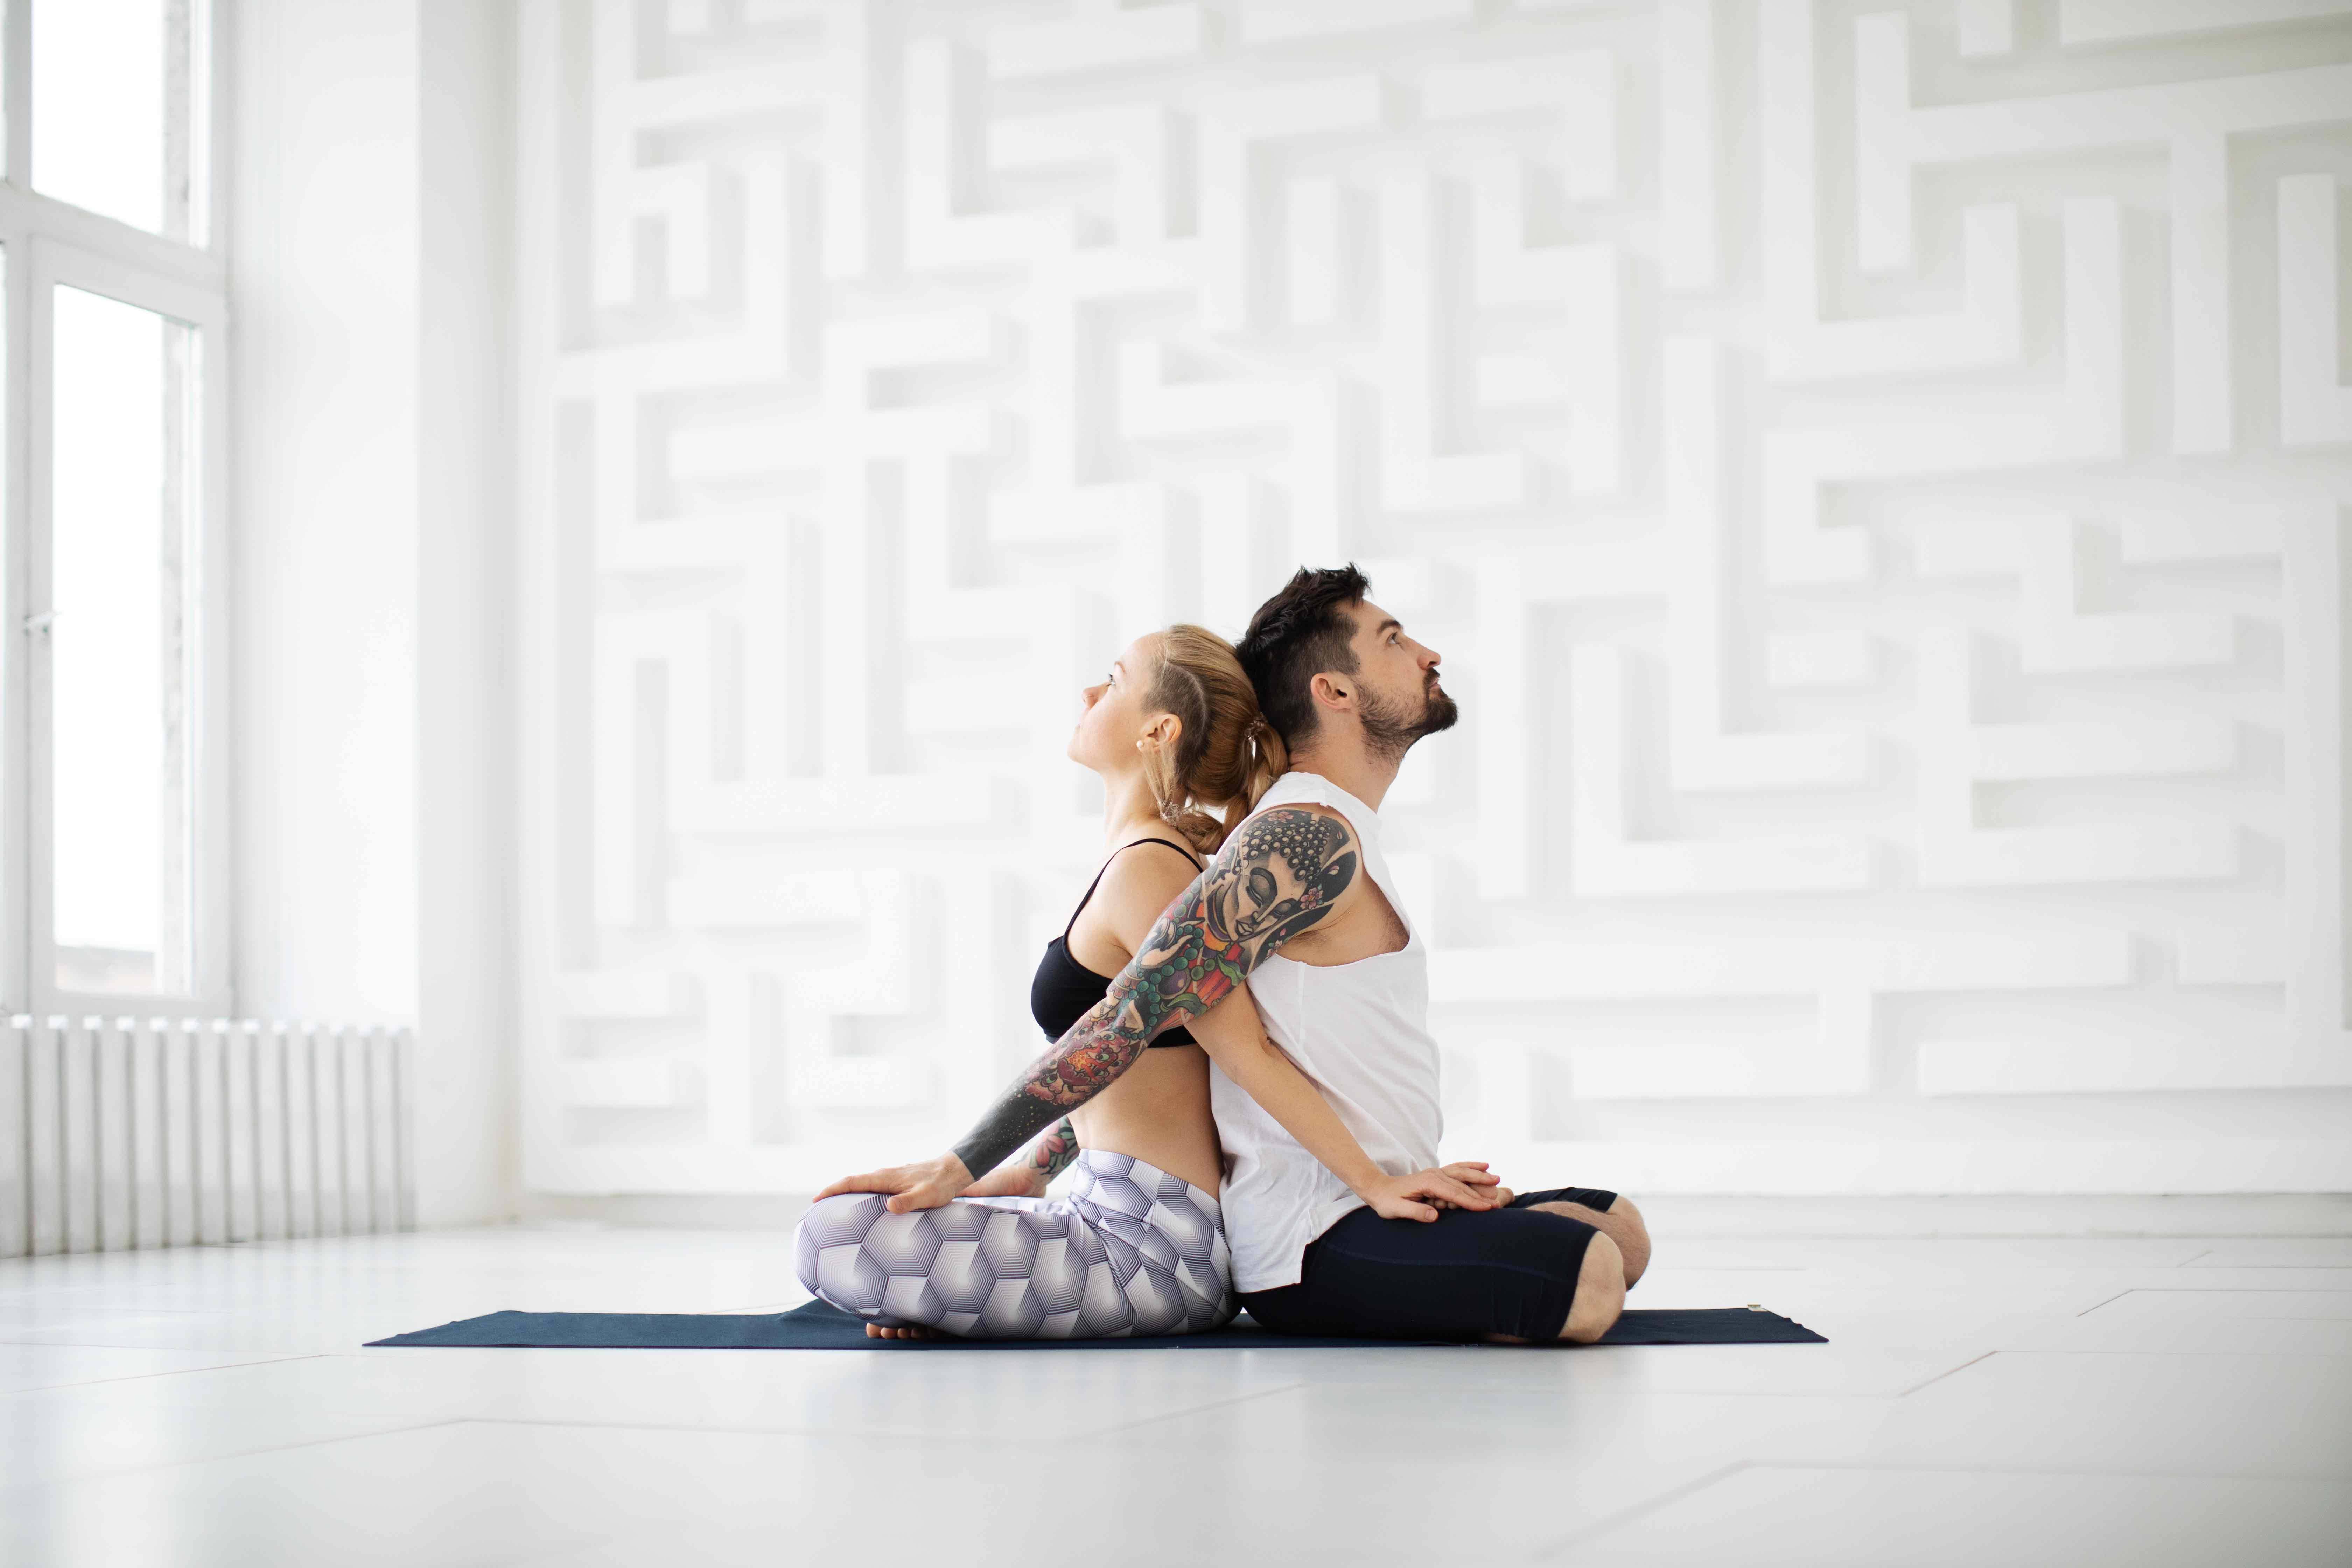 10 Places to Try Partner Yoga Around Philly This Valentine's Day